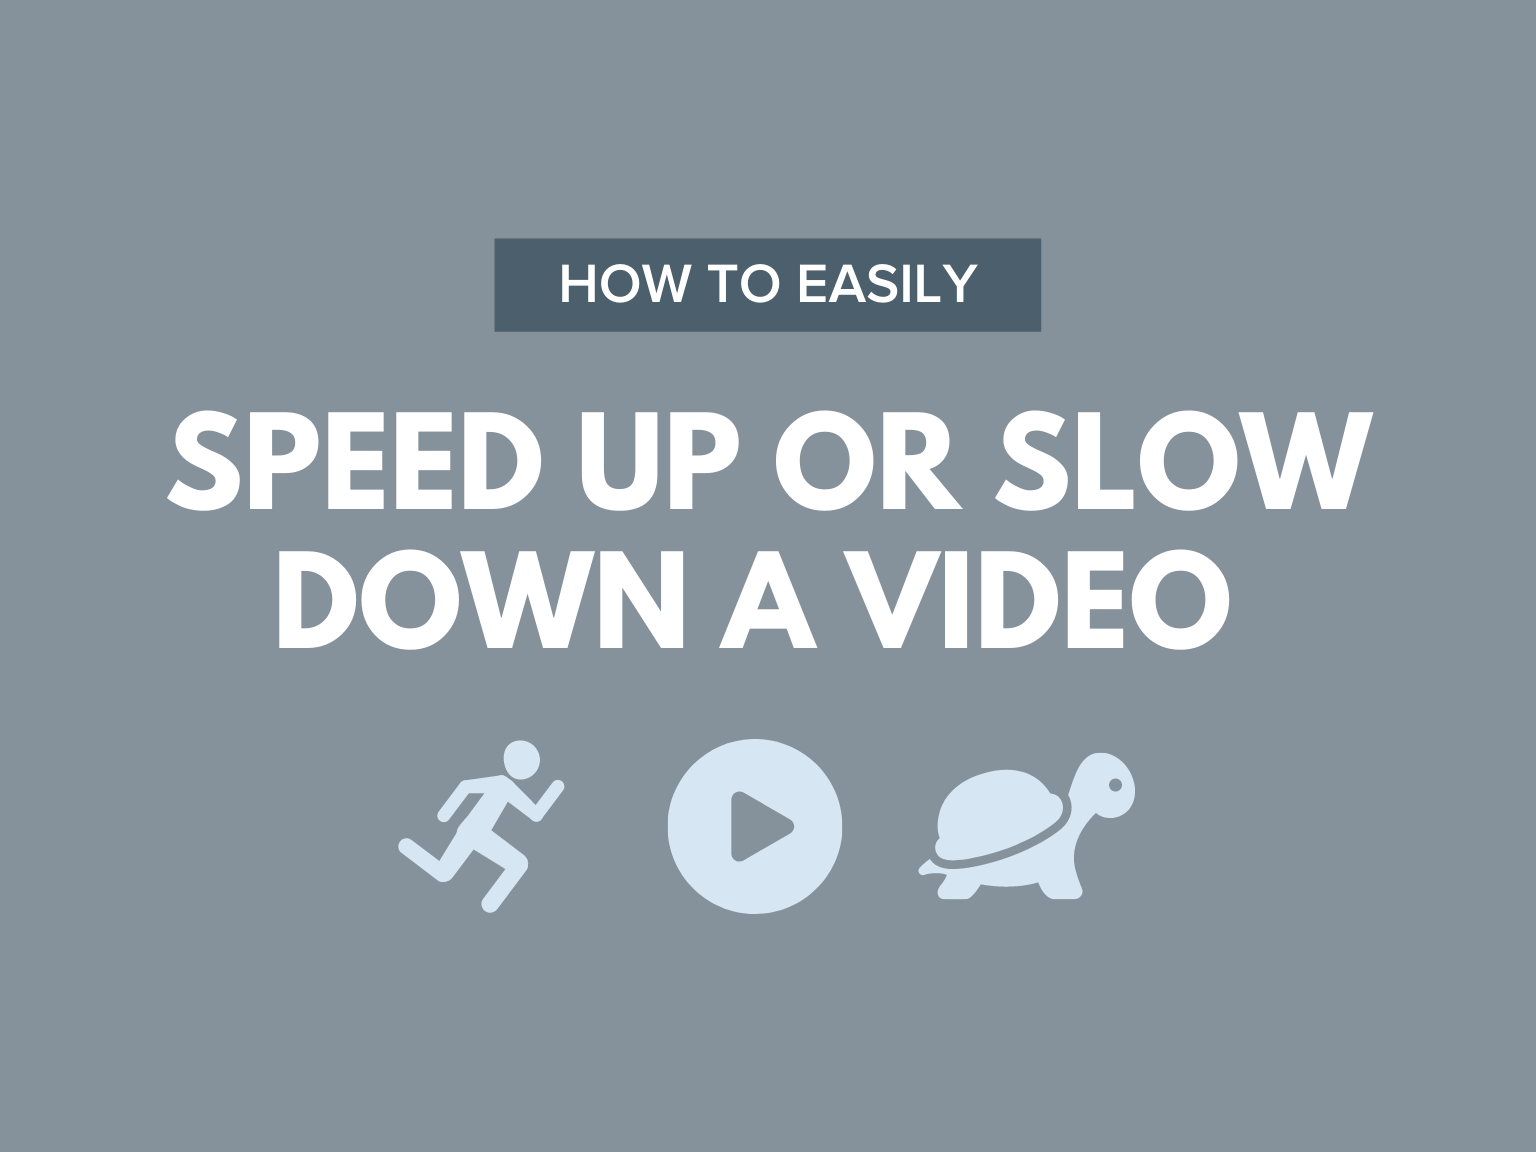 https://www.techsmith.com/blog/wp-content/uploads/2020/07/Header-How-to-Easily-Speed-up-or-Slow-down-Your-Videos.png